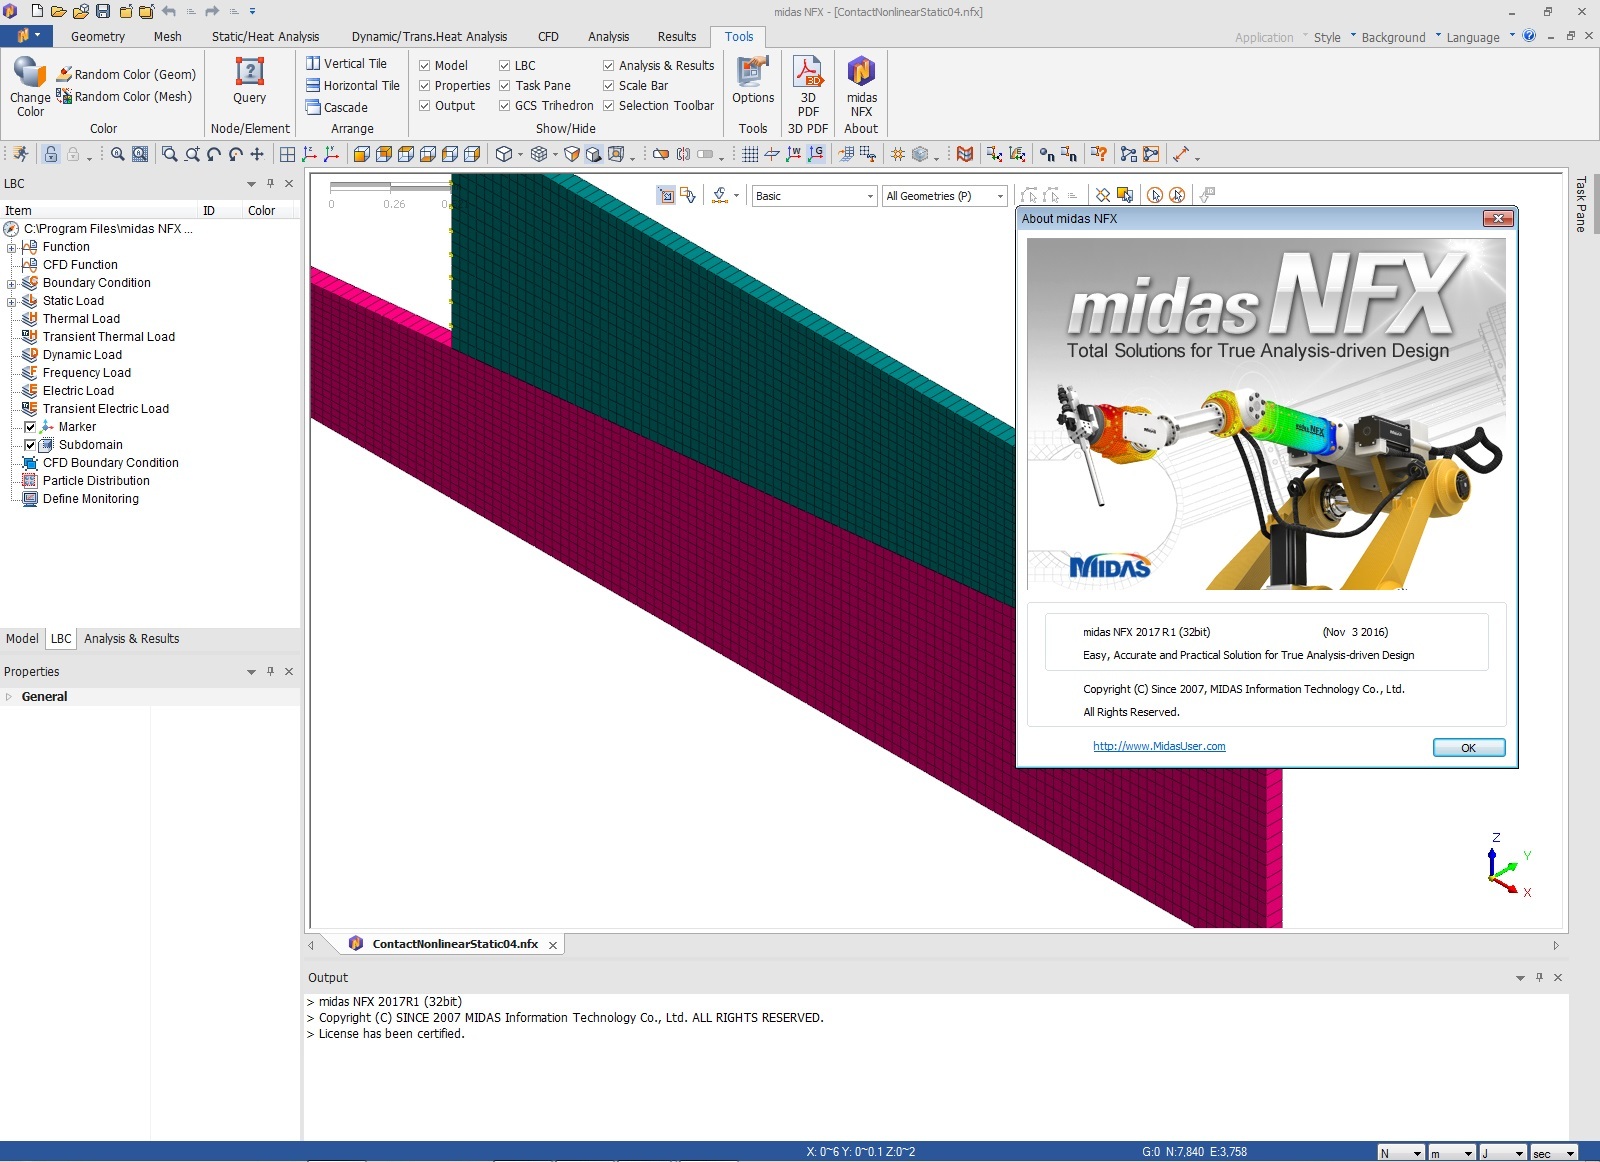 Working with midas NFX 2017 R1 build 03.11.2016 full license